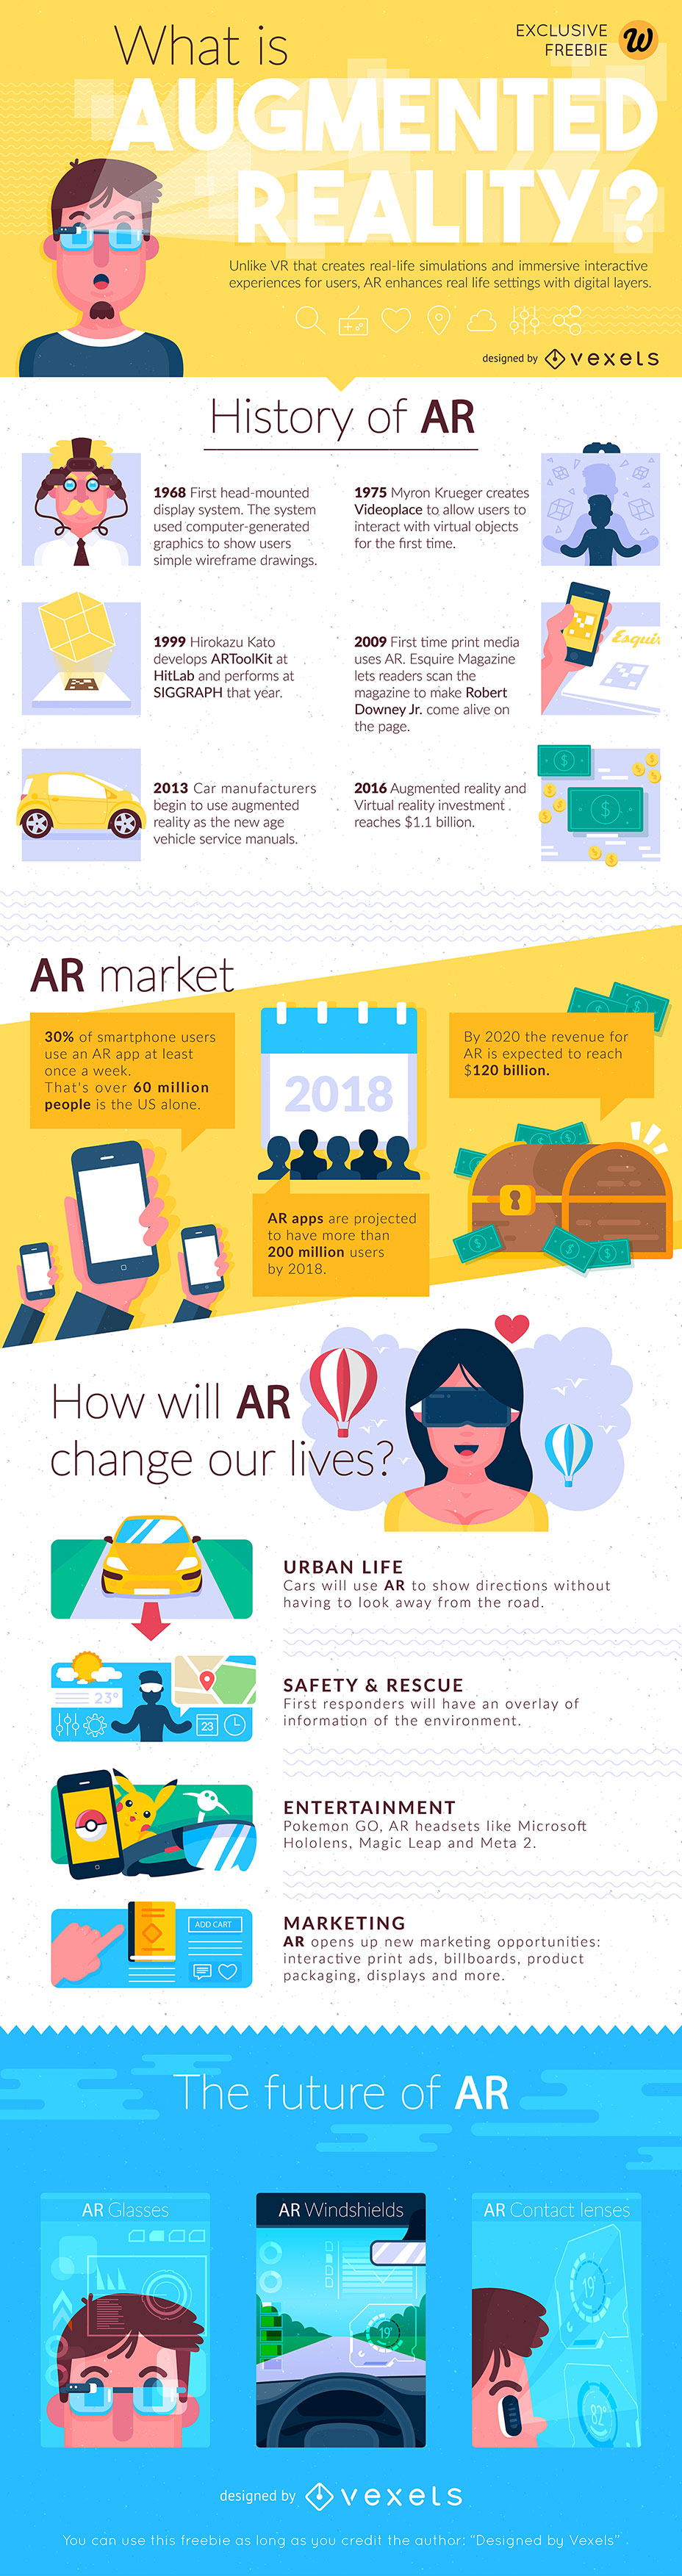 Infographic: What is Augmented Reality?